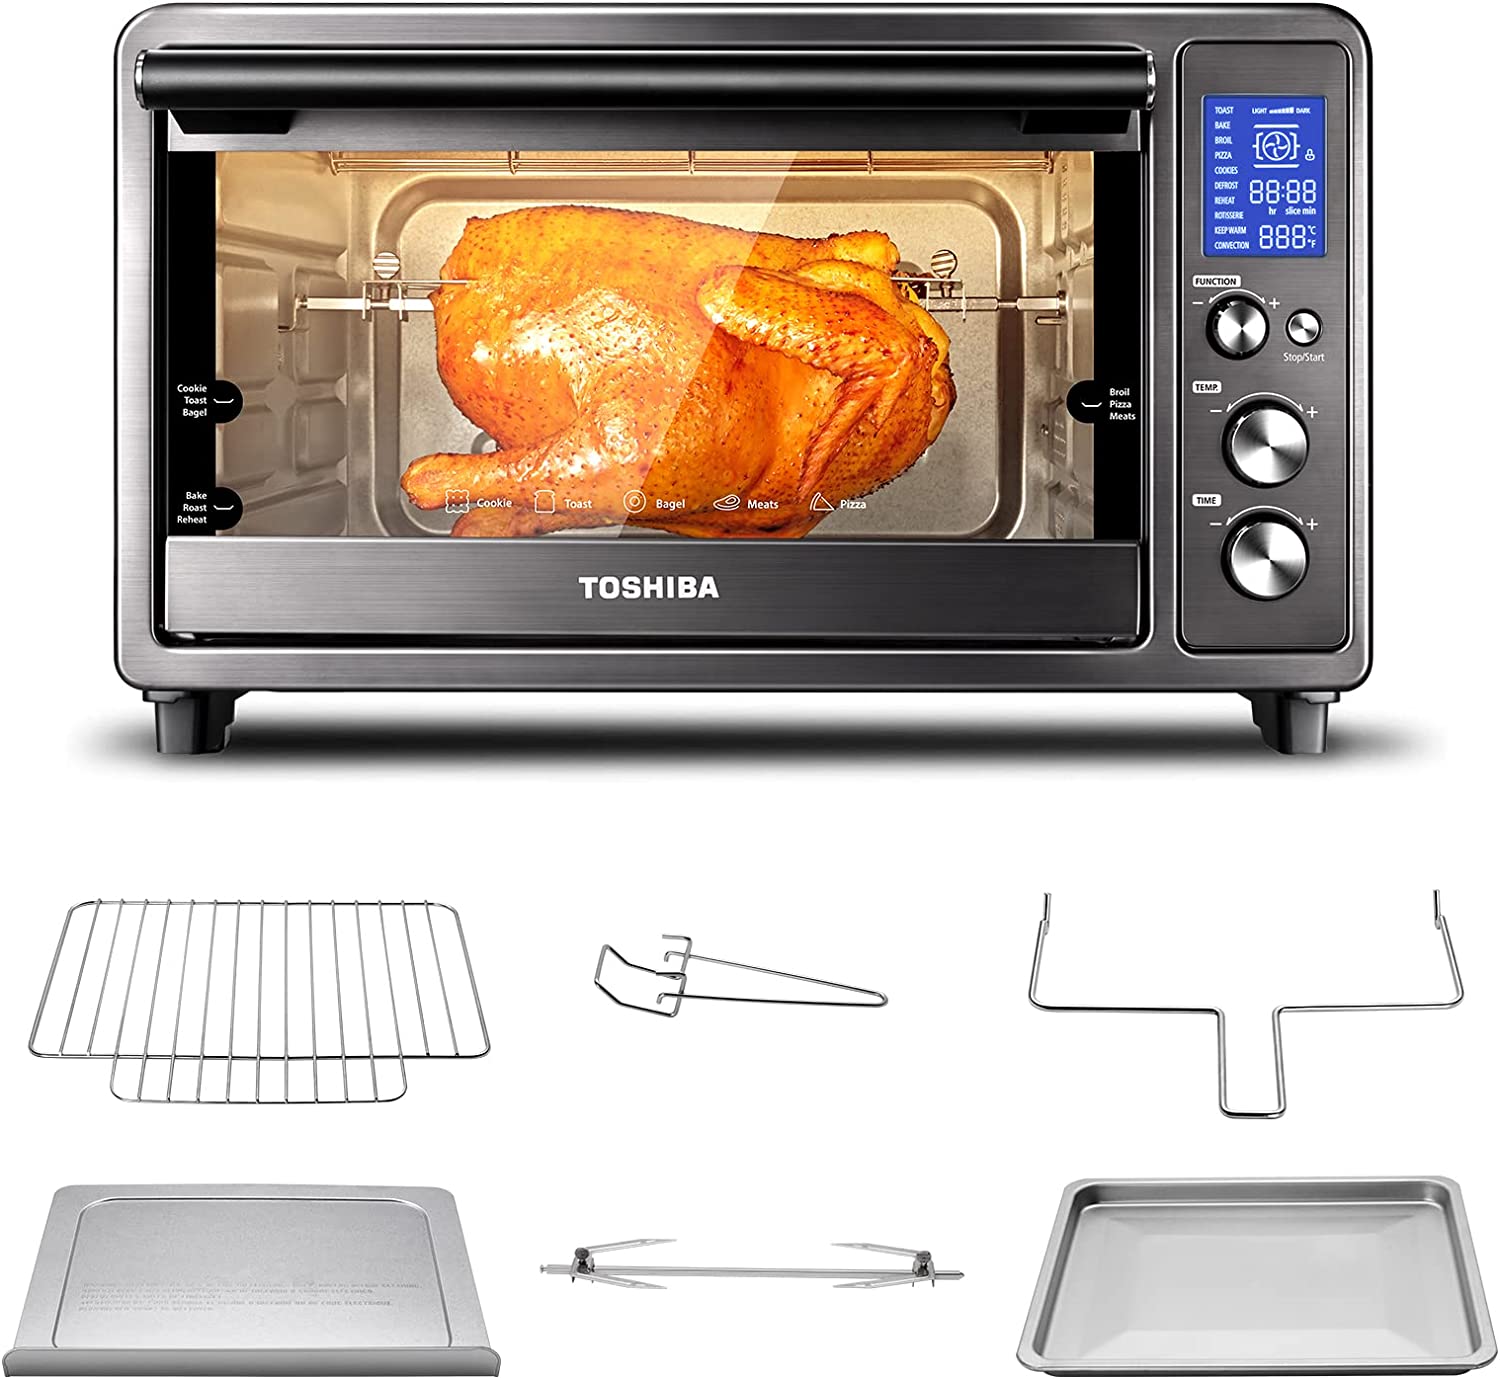 https://discounttoday.net/wp-content/uploads/2022/10/Toshiba-Speedy-Convection-Toaster-Oven-Countertop-with-Double-Infrared-Heating-10-in-1-with-Toast-Pizza-Rotisserie-Larger-6-slice-Capacity-1700W-Black-Stainless-Steel-Includes-6-Accessories.jpg